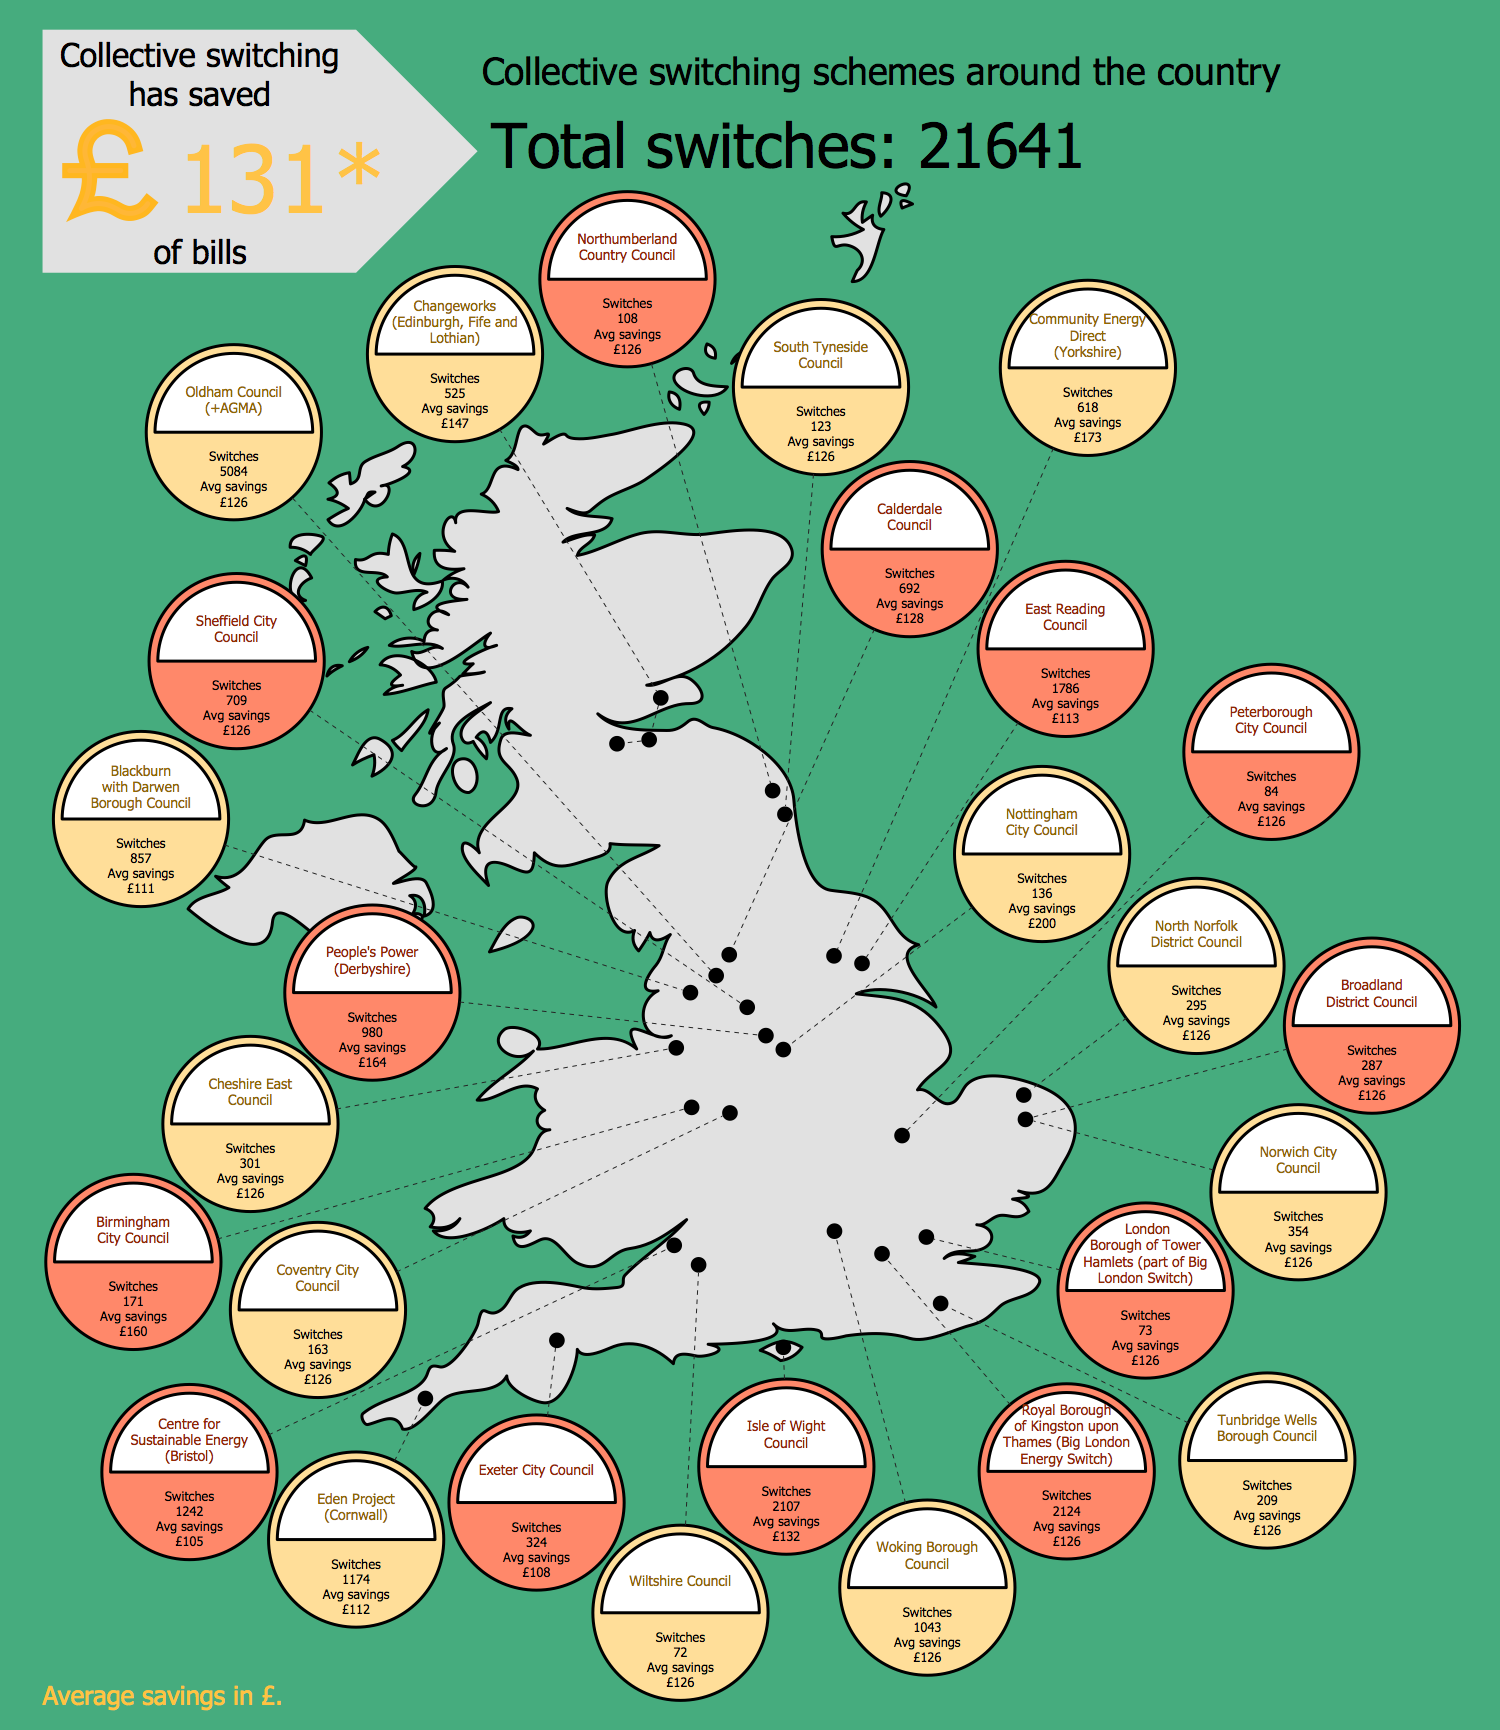 Collective Switching Schemes Around the Country